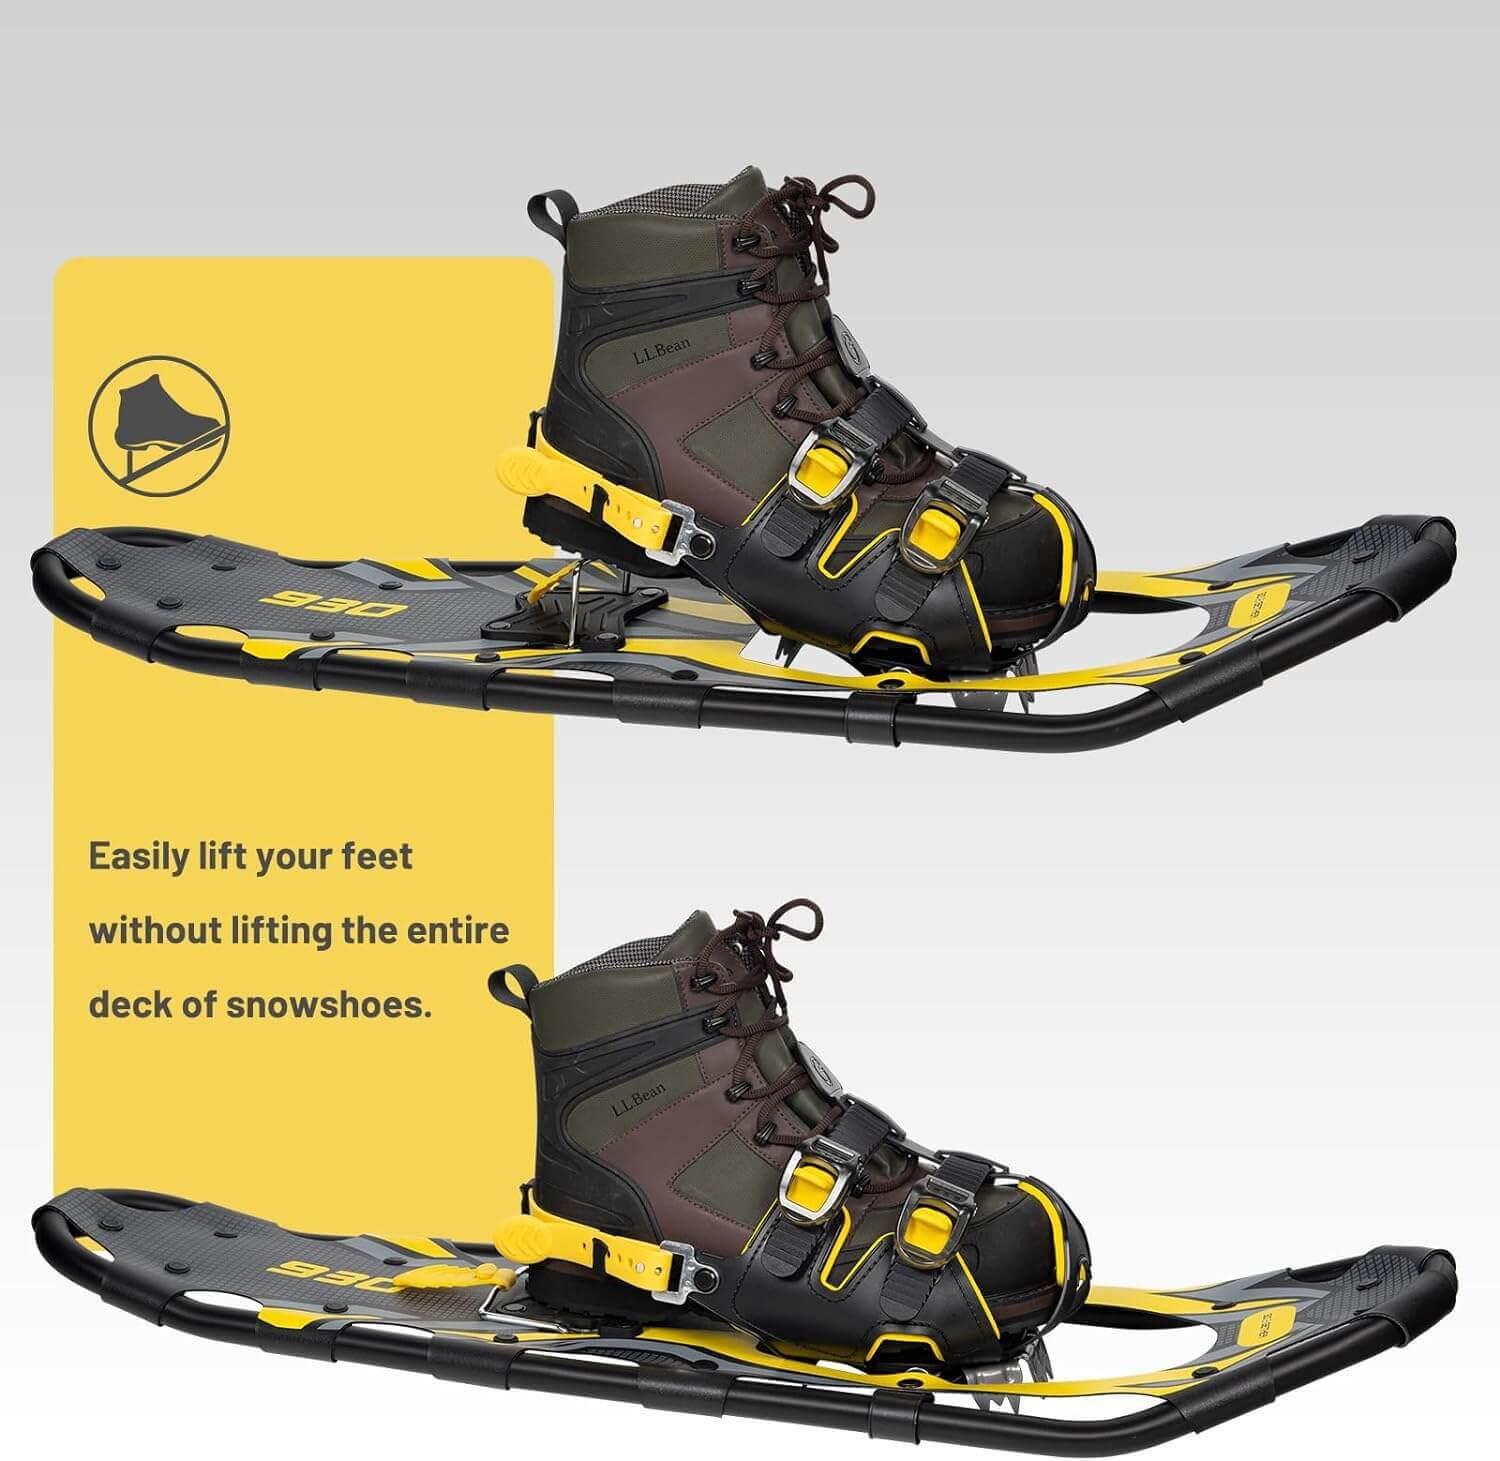 Shop The Latest >G2 Light Weight Snowshoes with Trekking Poles & Carrying Bag > *Only $121.49*> From The Top Brand > *G2 GO2GETHERl* > Shop Now and Get Free Shipping On Orders Over $45.00 >*Shop Earth Foot*